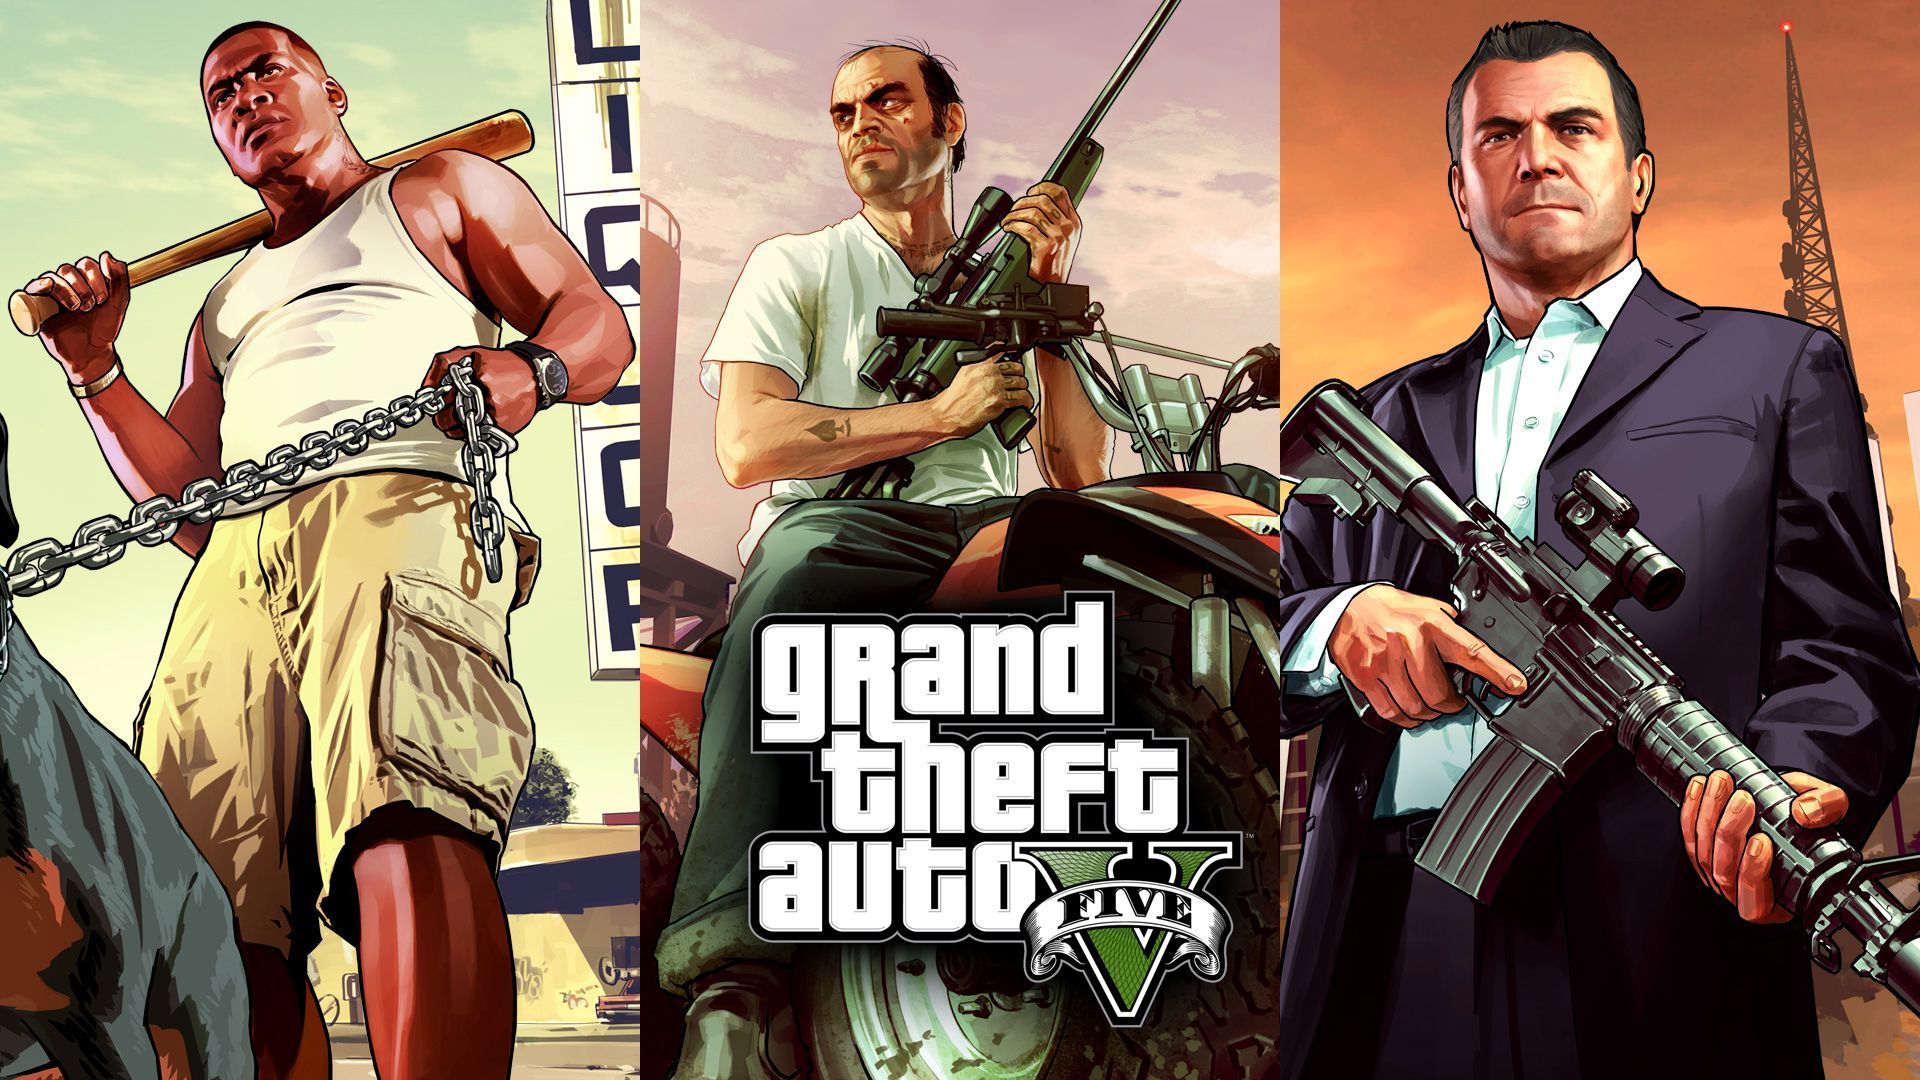 Grand Theft Auto 5 Widescreen HD Wallpaper - Download Page